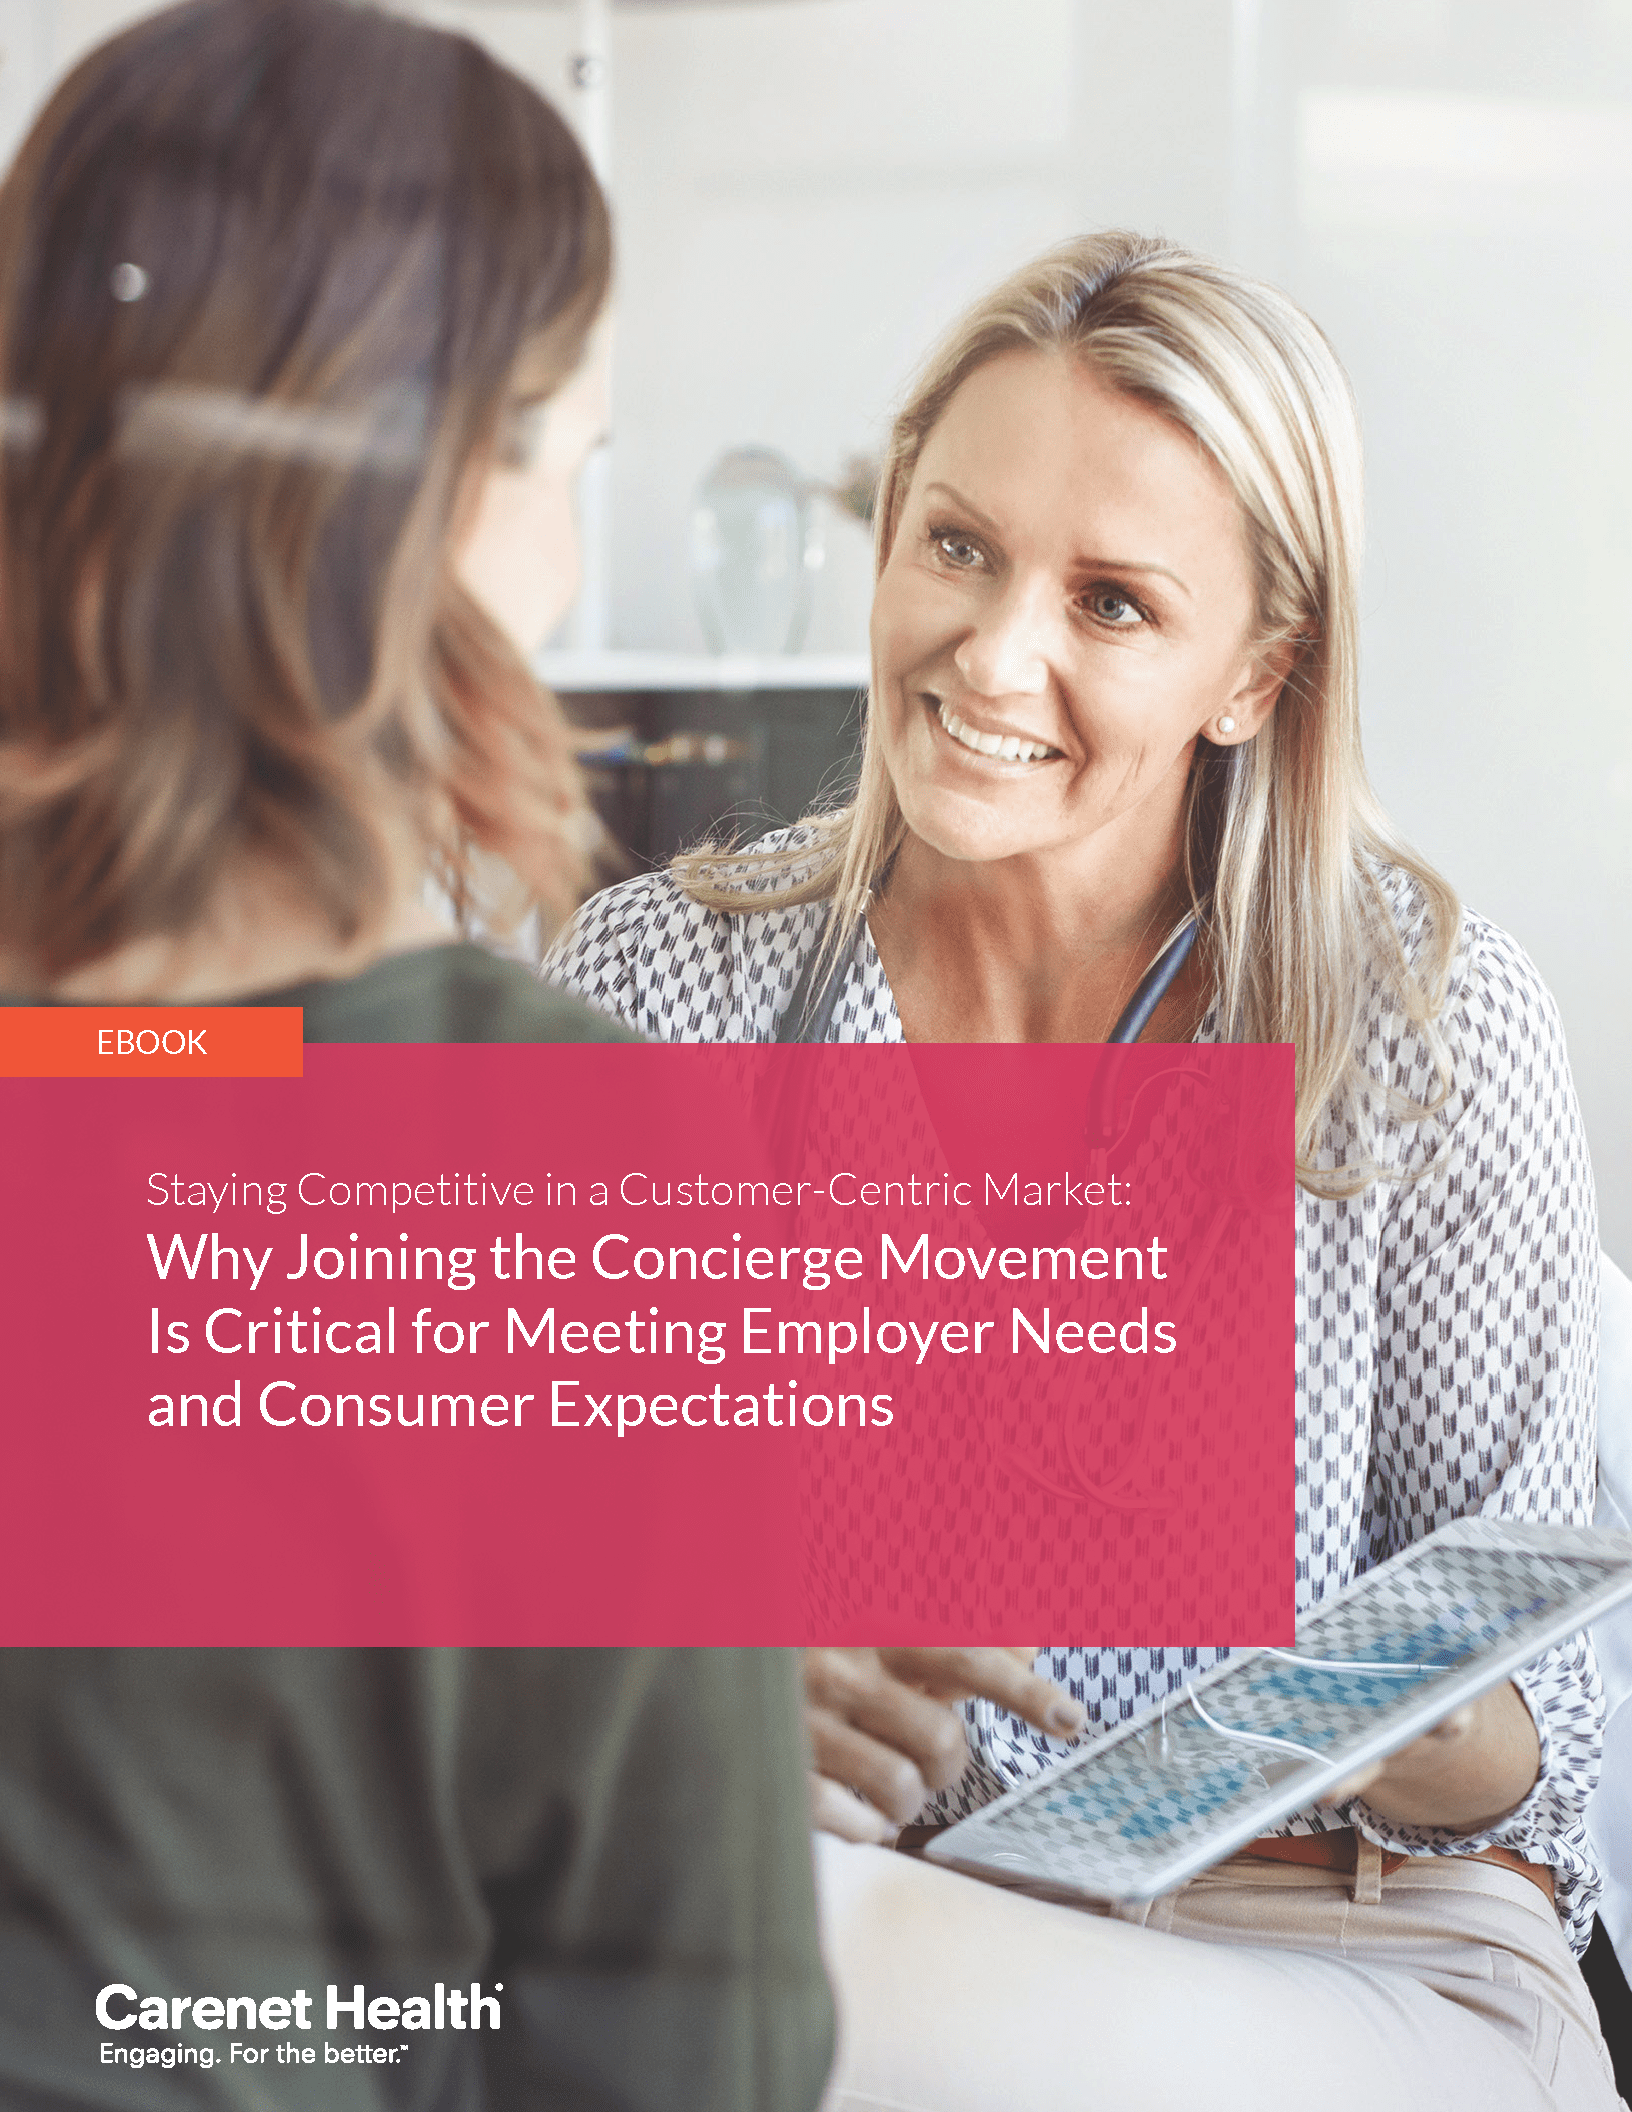 ebook why joining concierge movement is critical